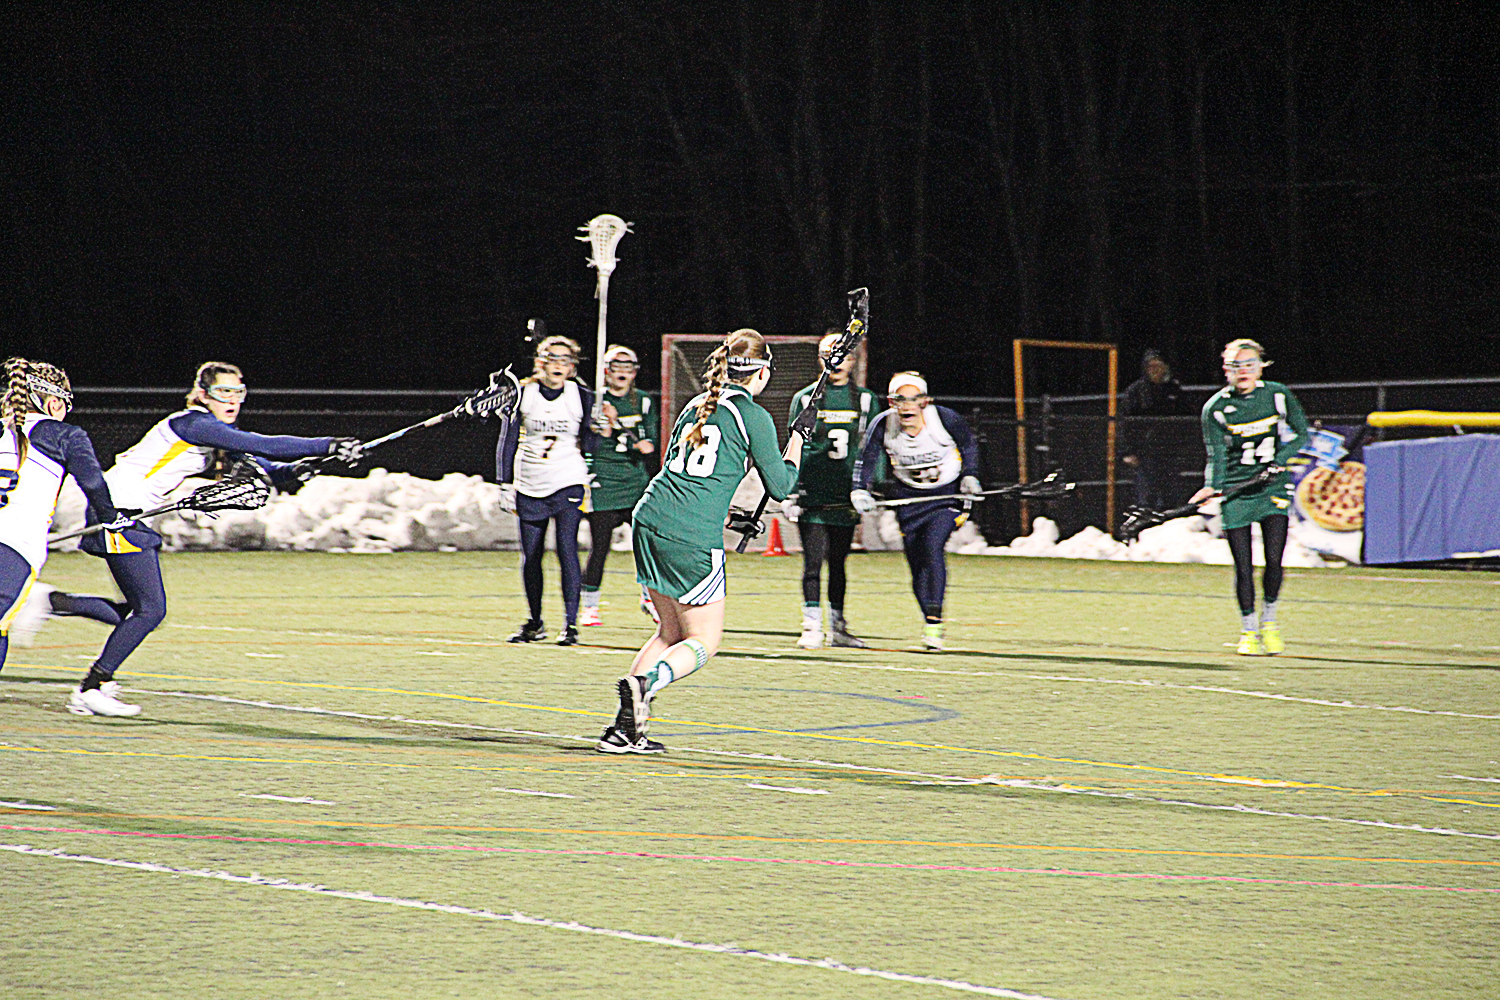 Fitchburg State Withstands UMass Dartmouth, 10-7